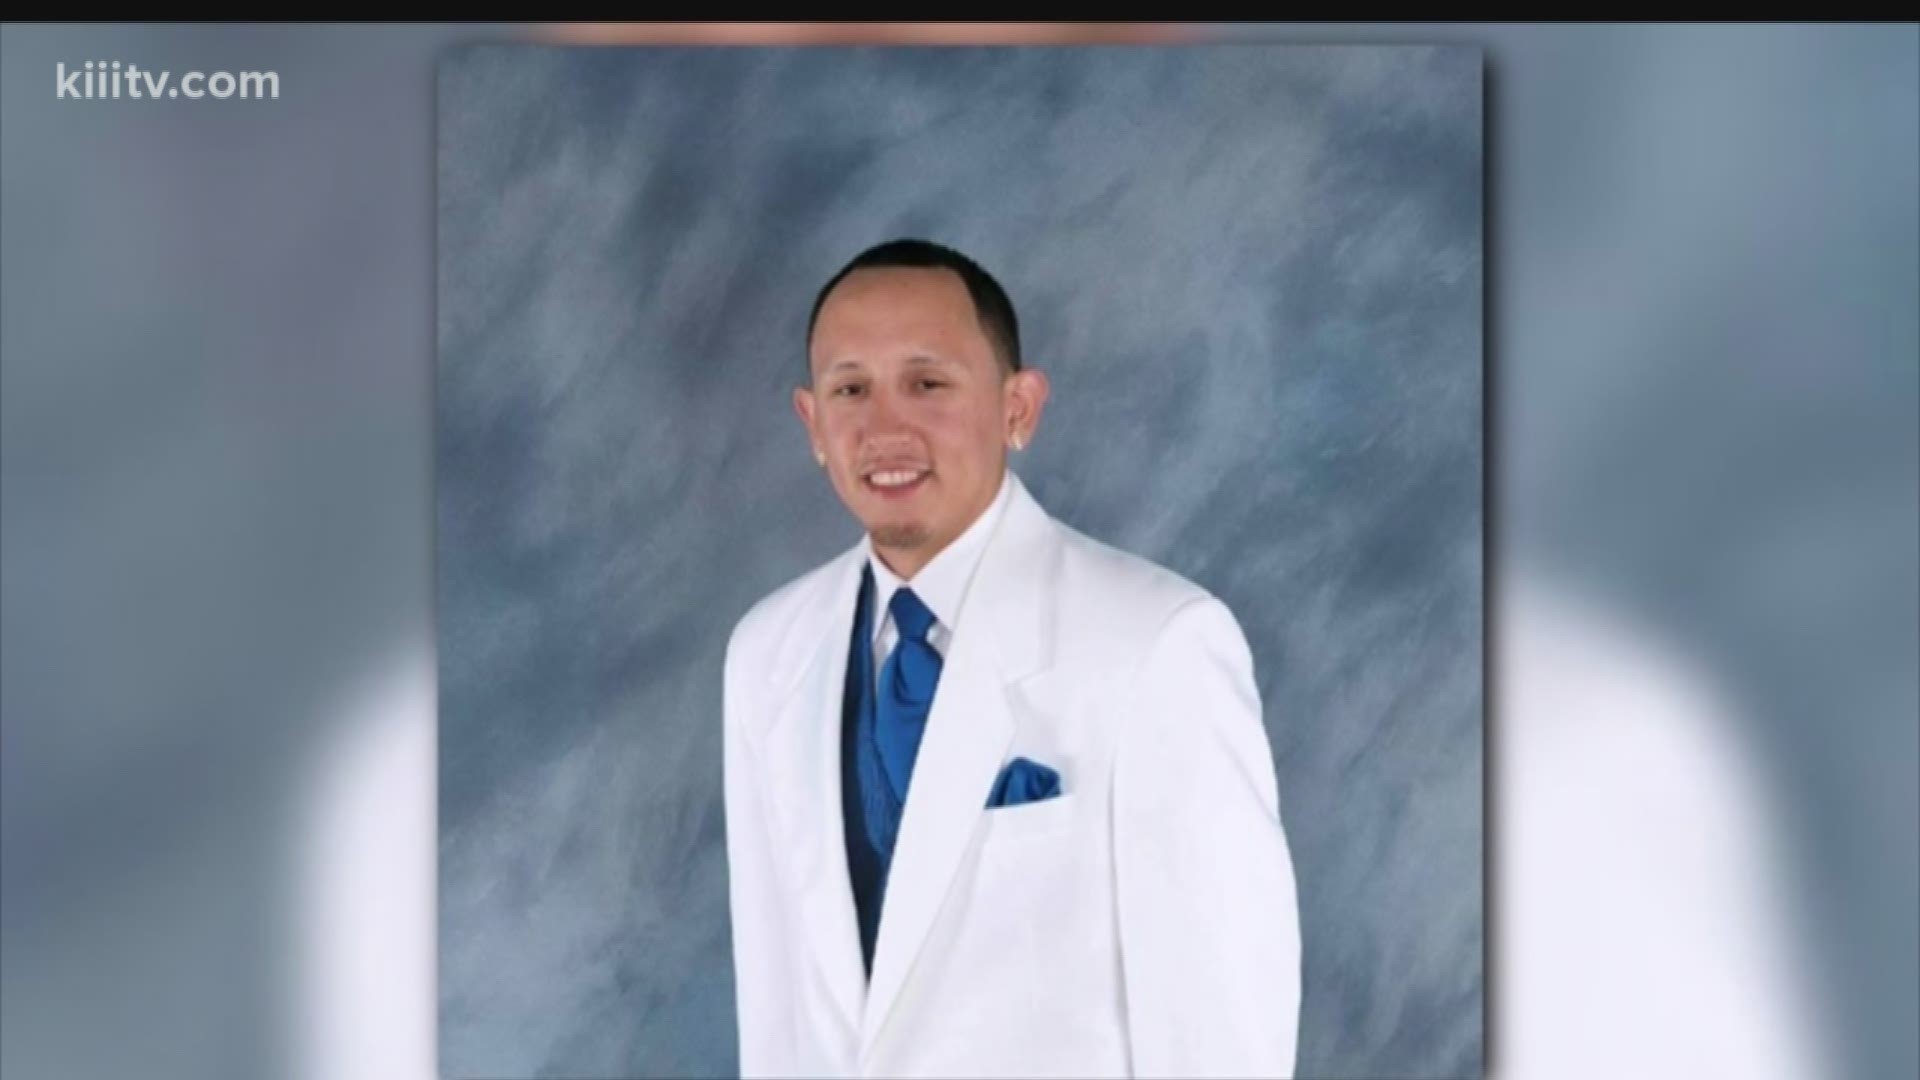 Eric Lee Tunchez, candidate for Corpus Christi's District 3 City Council seat, was indicted Thursday on charges of promoting prostitution, according to the First Assistant District Attorney Matt Manning.